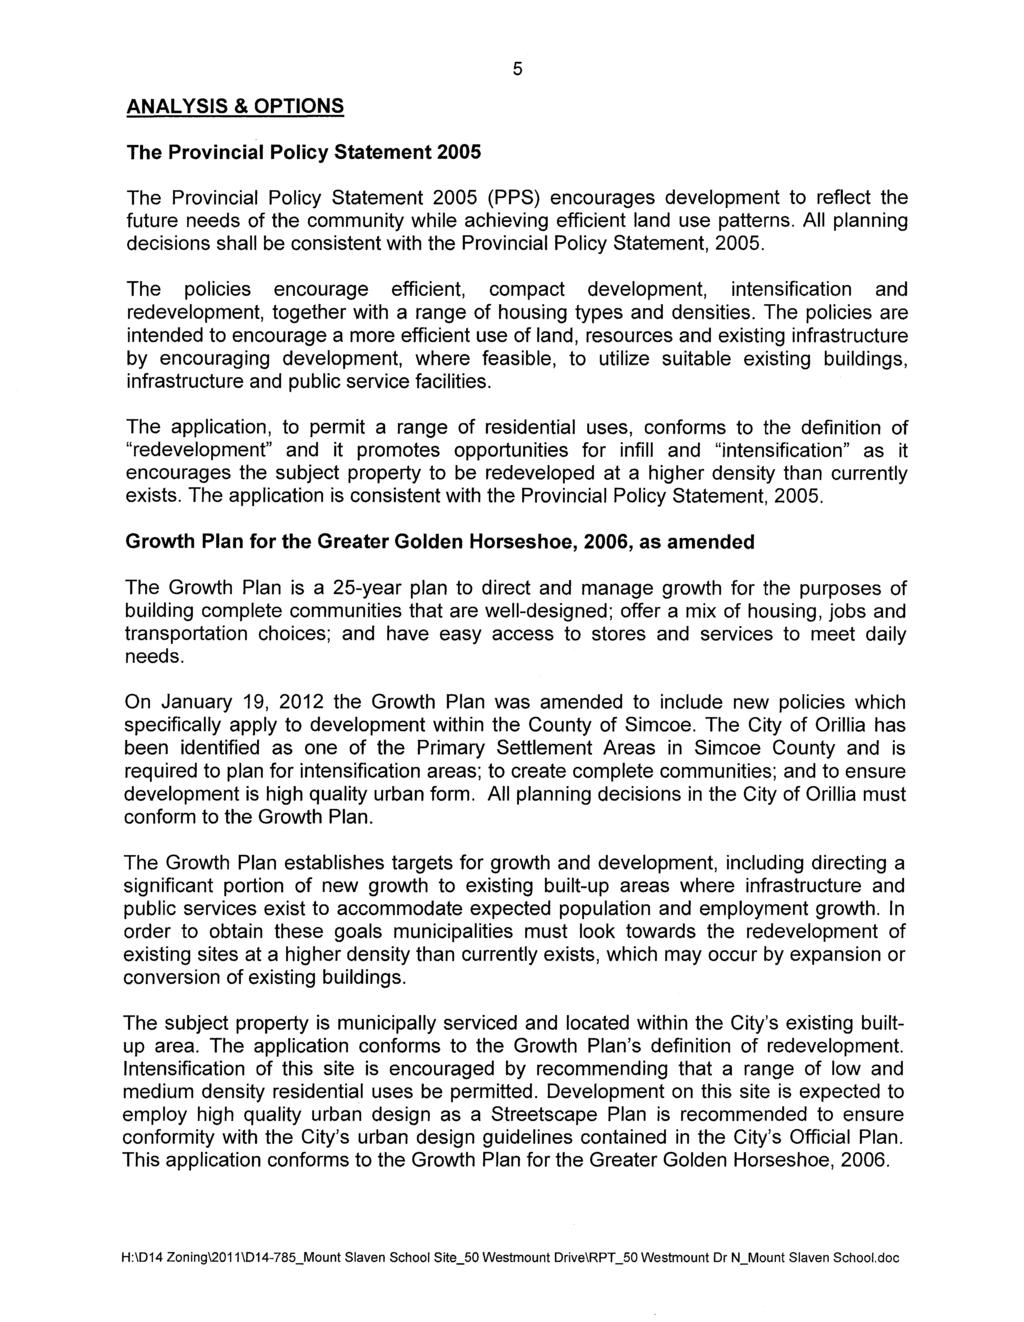 5 ANALYSS & OPTONS The Provincial Policy Statement 2005 The Provincial Policy Statement 2005 (PPS) encourages development to reflect the future needs of the community while achieving efficient land